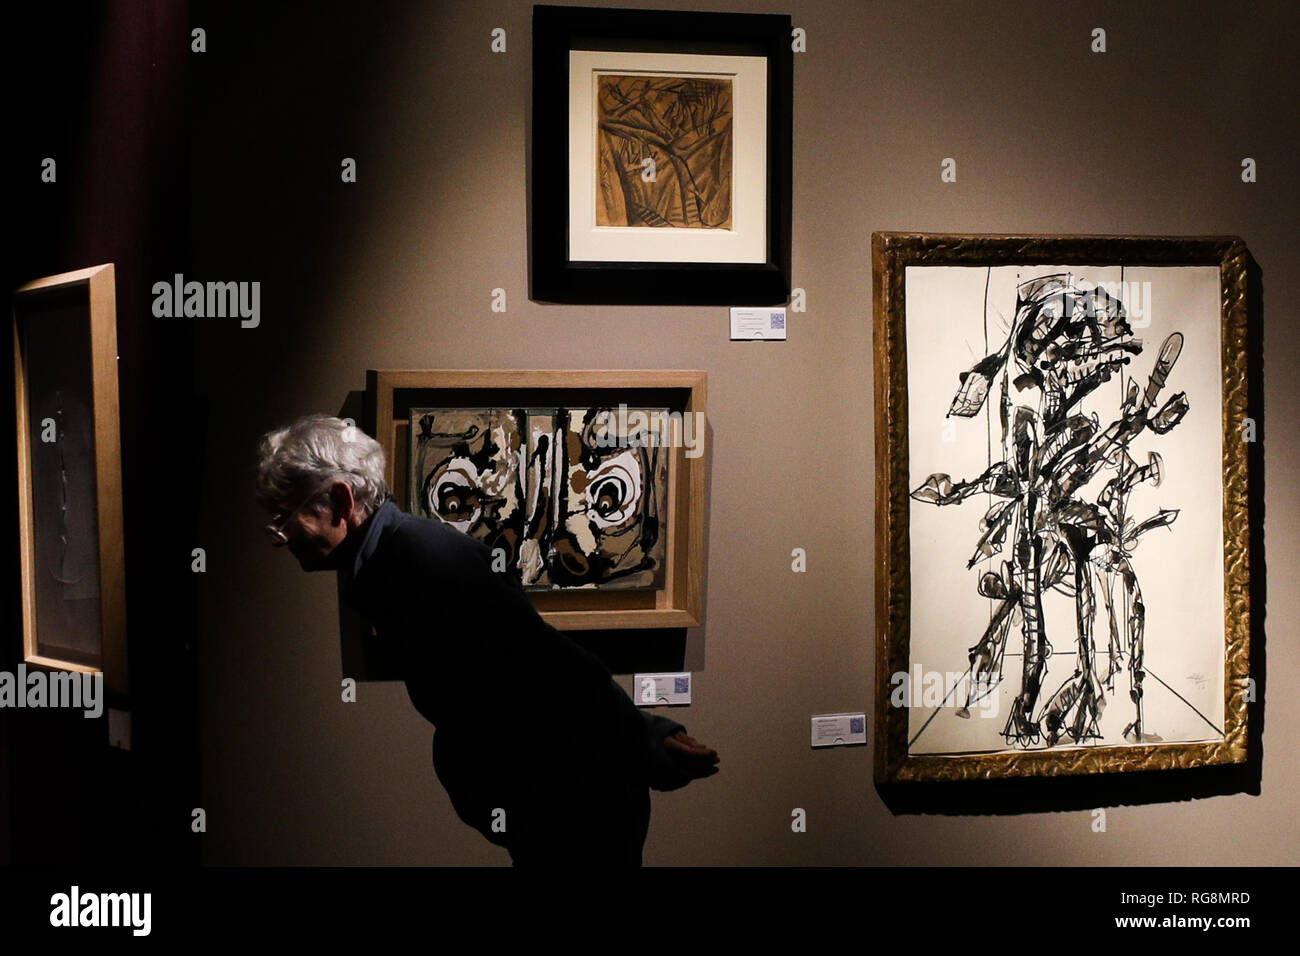 Brussels, A total of 133 Belgian and international galleries presented tens of thousands of art pieces at the fair. 3rd Feb, 2019. A visitor views exhibits from Simon Studer Art during the 64th edition of Brafa Art Fair at the Tour & Taxis in Brussels, Belgium, Jan. 28, 2019. A total of 133 Belgian and international galleries presented tens of thousands of art pieces at the fair, which will last till Feb. 3, 2019. Created in 1956, the Brafa Art Fair is one of the world's oldest and most prestigious art fairs.? Credit: Zheng Huansong/Xinhua/Alamy Live News Stock Photo